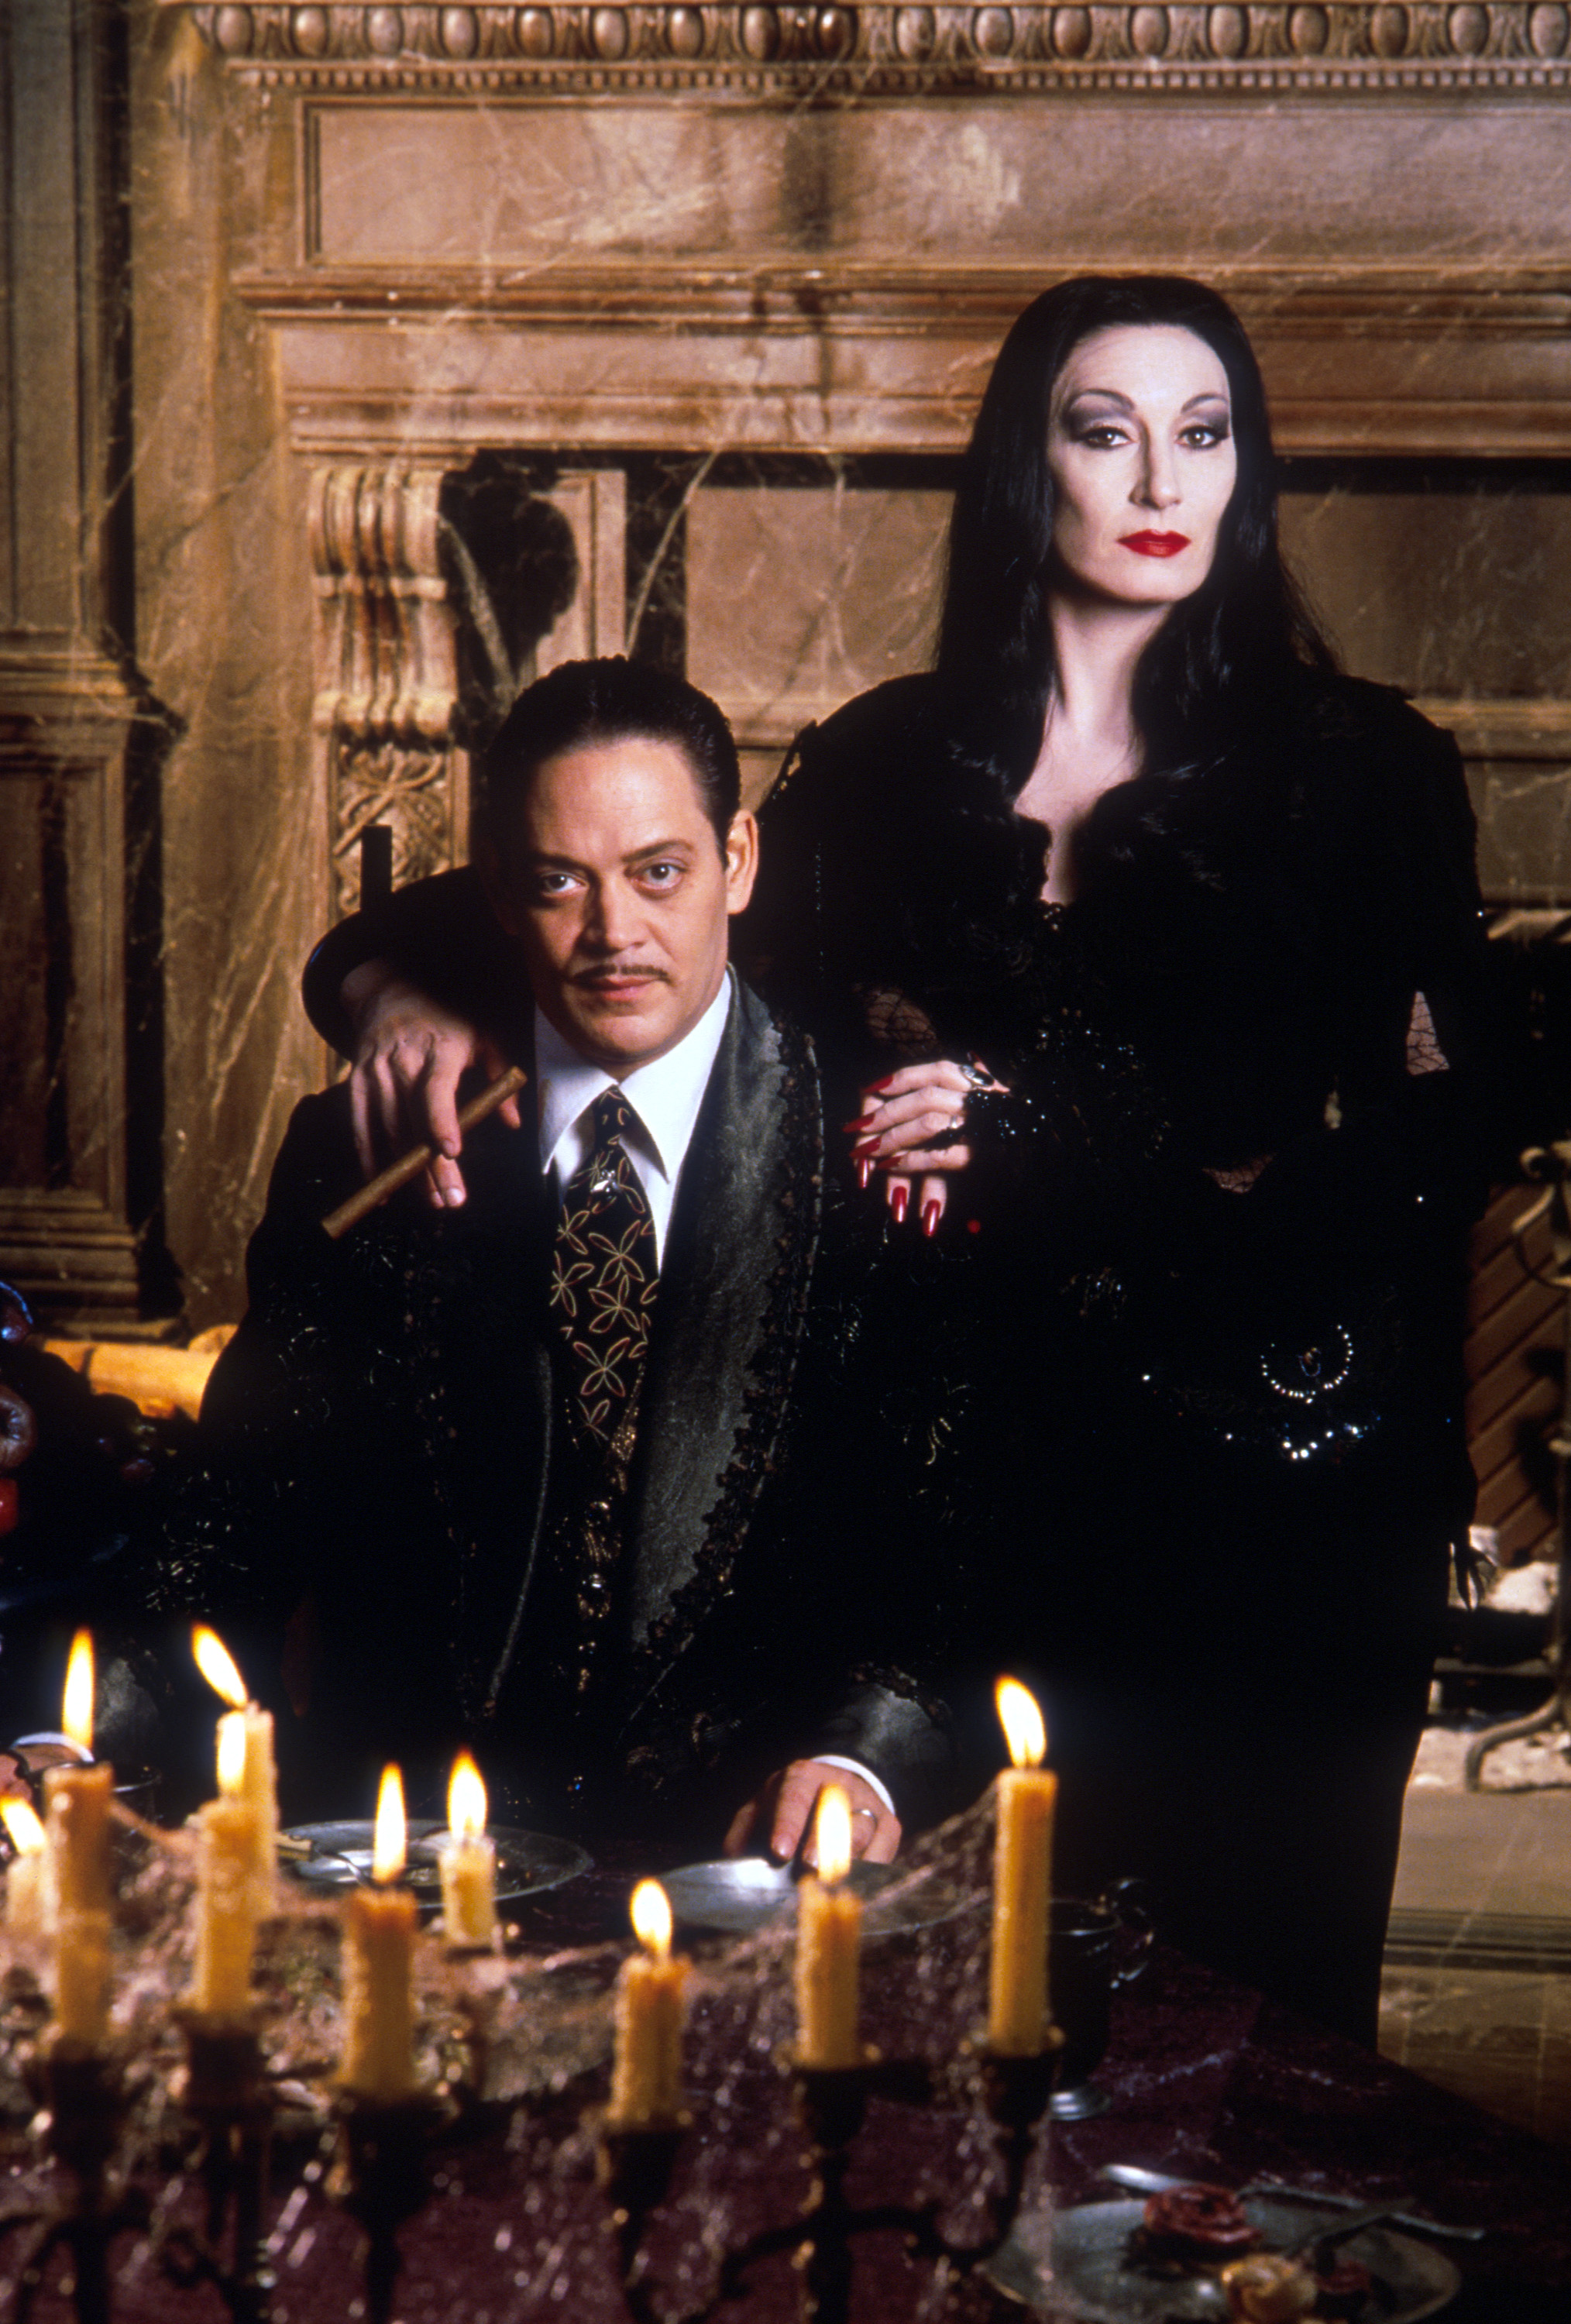 Still of Raul Julia and Anjelica Huston in The Addams Family (1991)